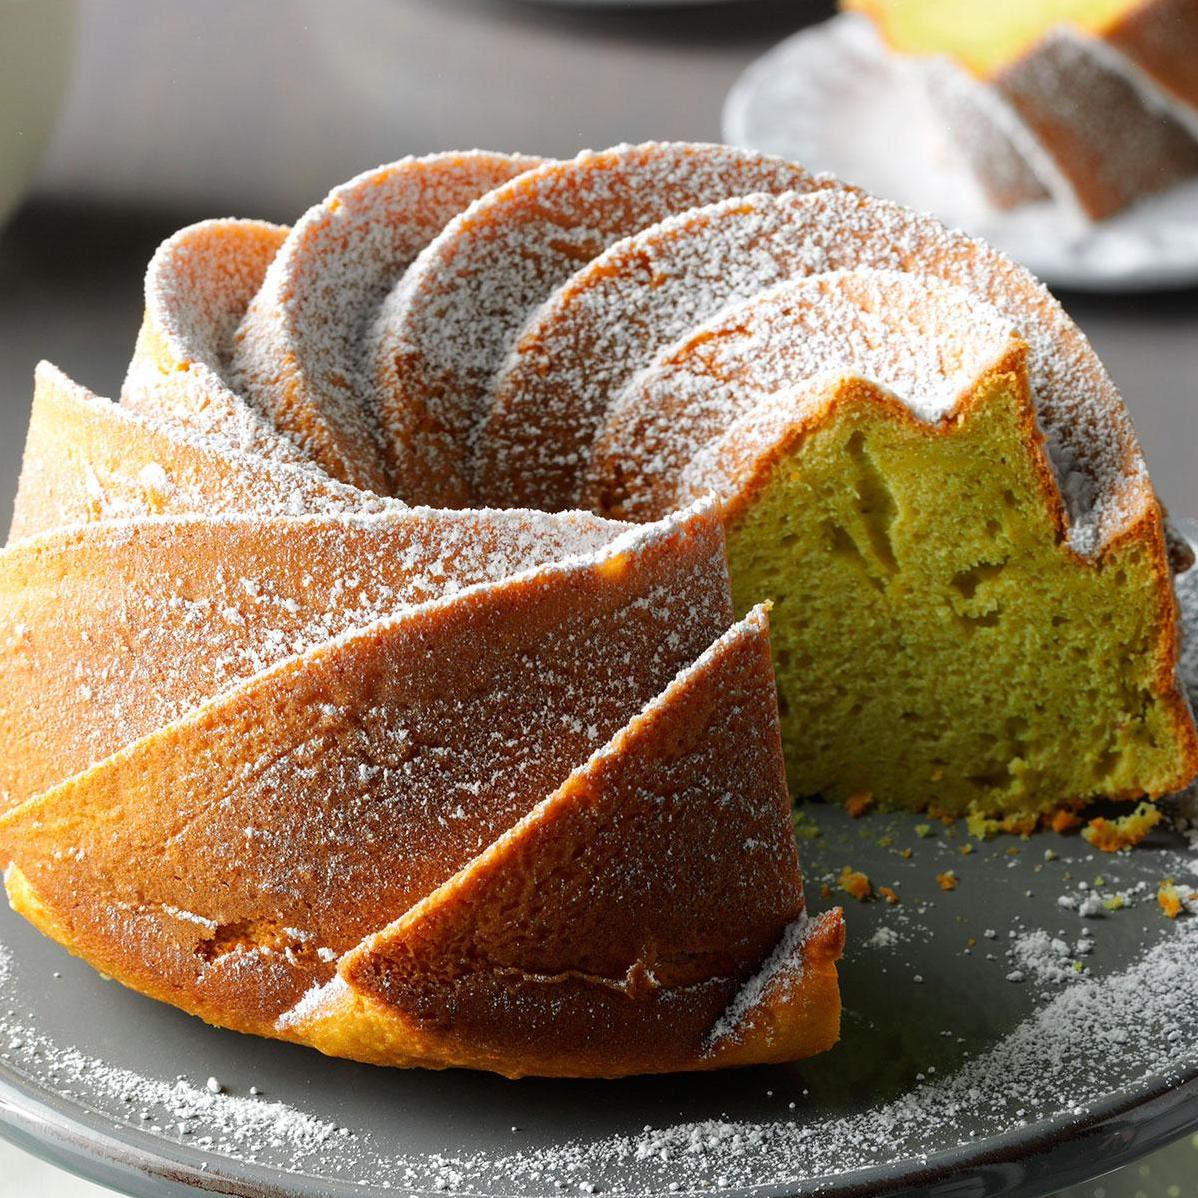  Watch out, this Pistachio Pound Cake will steal your heart!